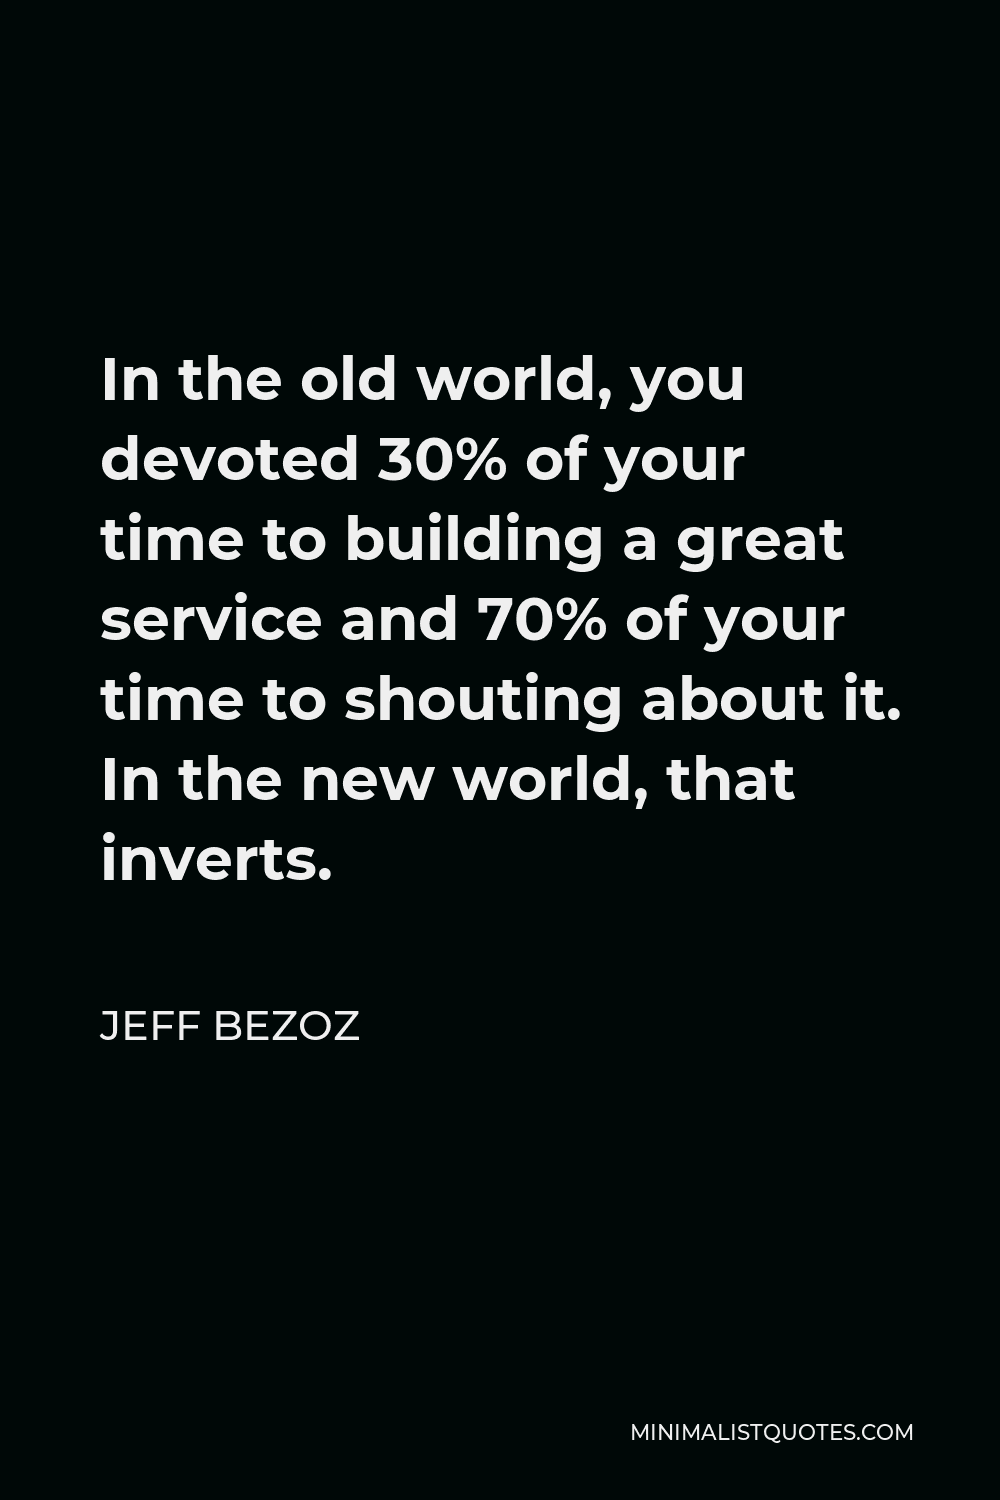 Jeff Bezoz Quote - In the old world, you devoted 30% of your time to building a great service and 70% of your time to shouting about it. In the new world, that inverts.